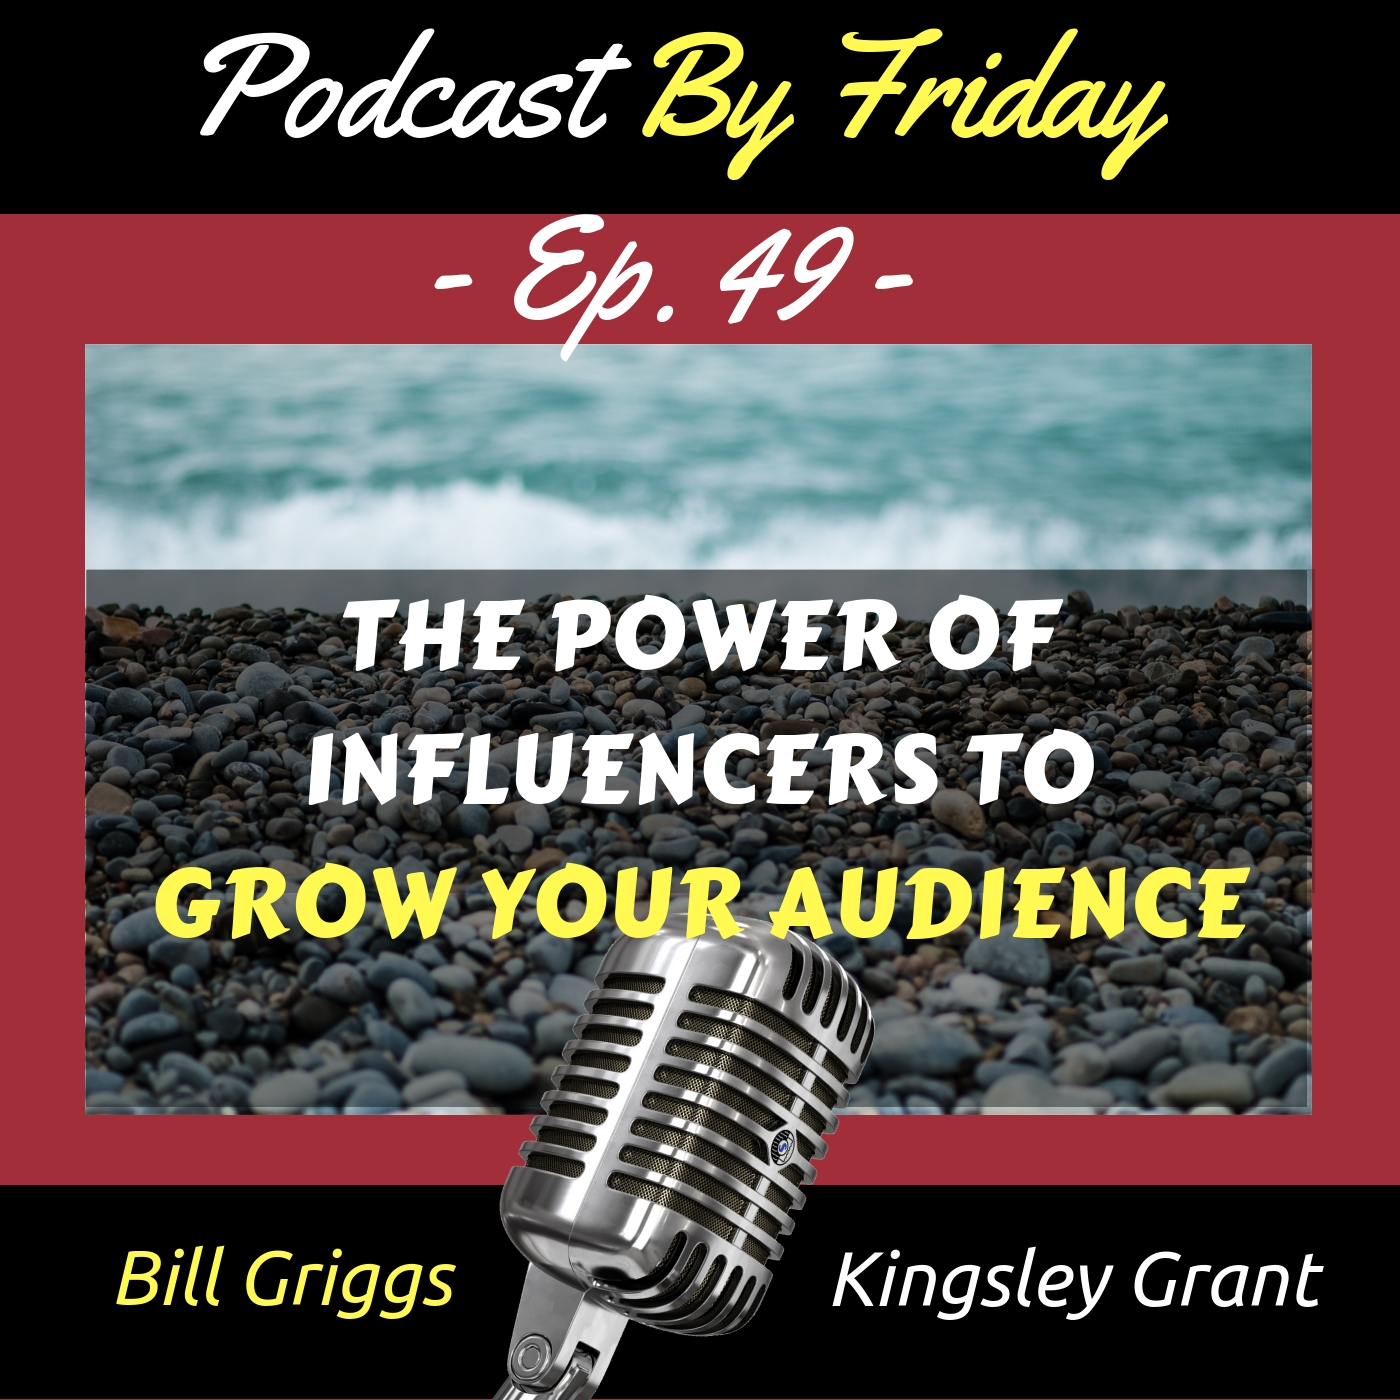 Influencers grow your audience